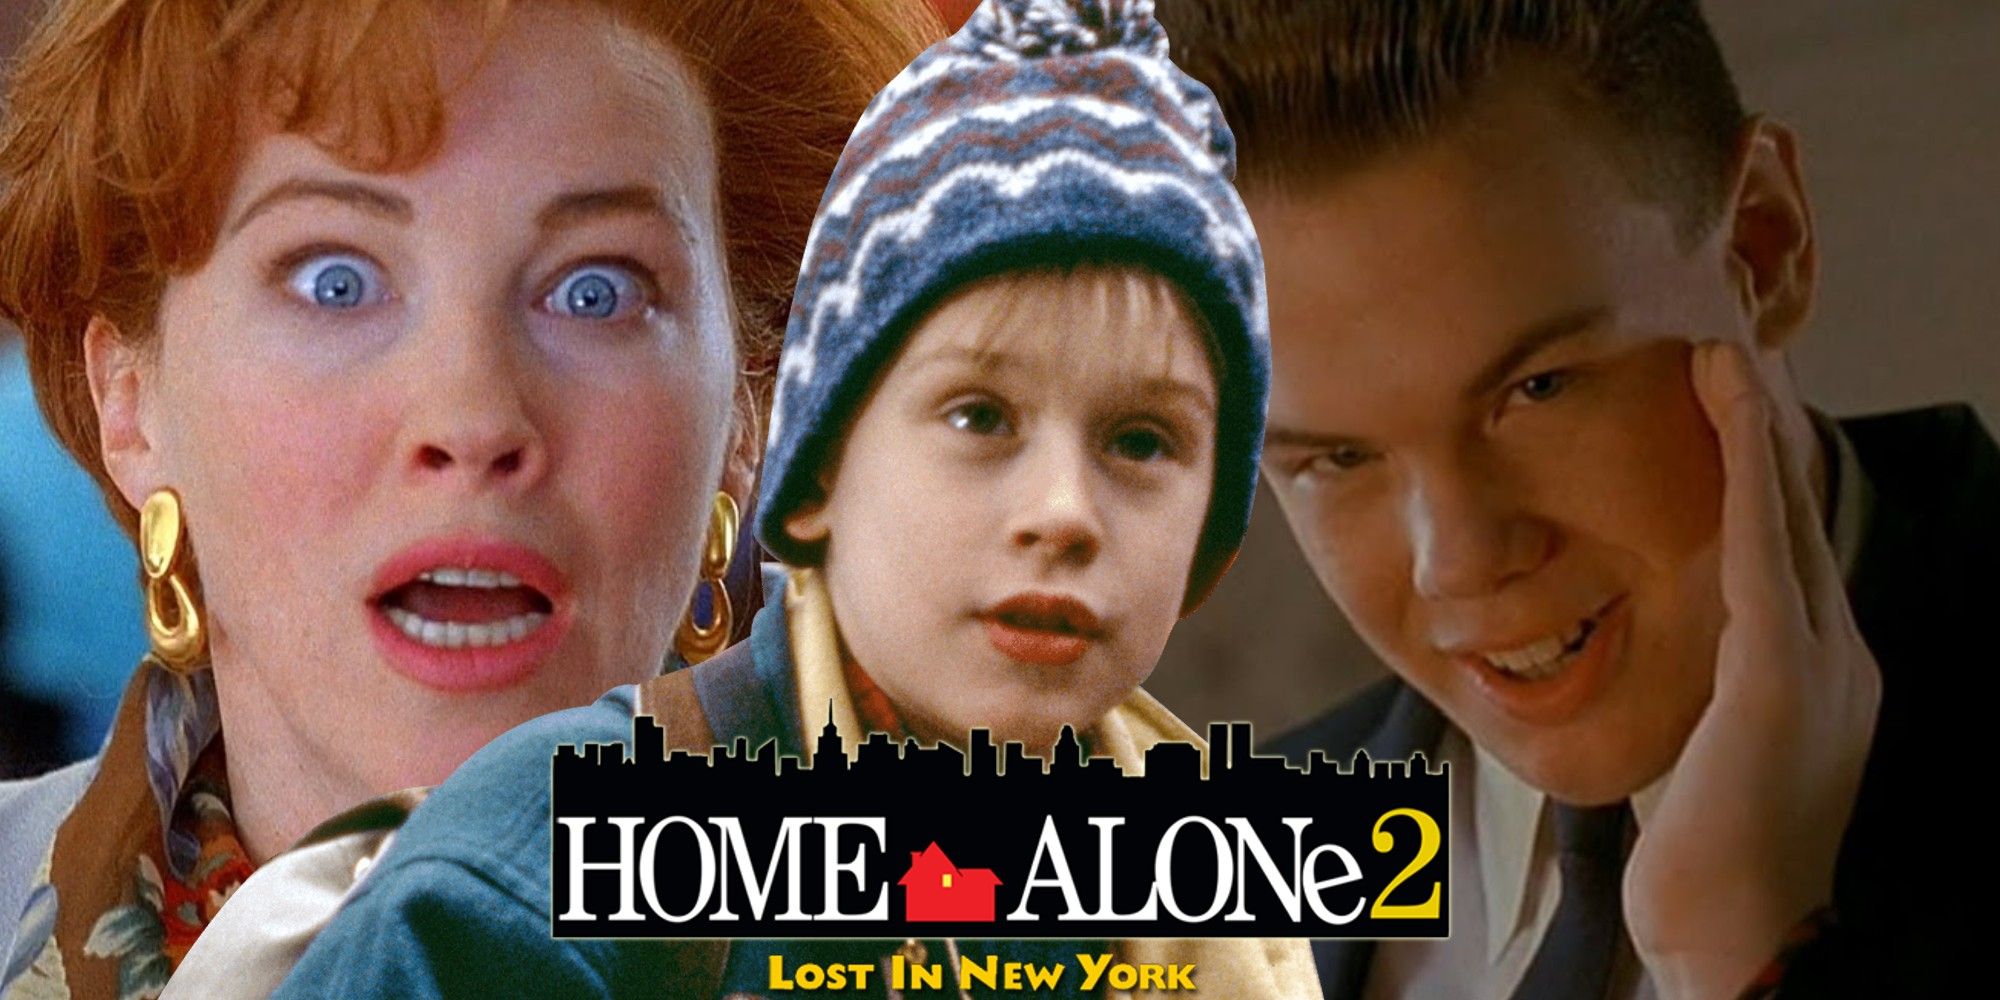 15 Best Home Alone 2 Quotes